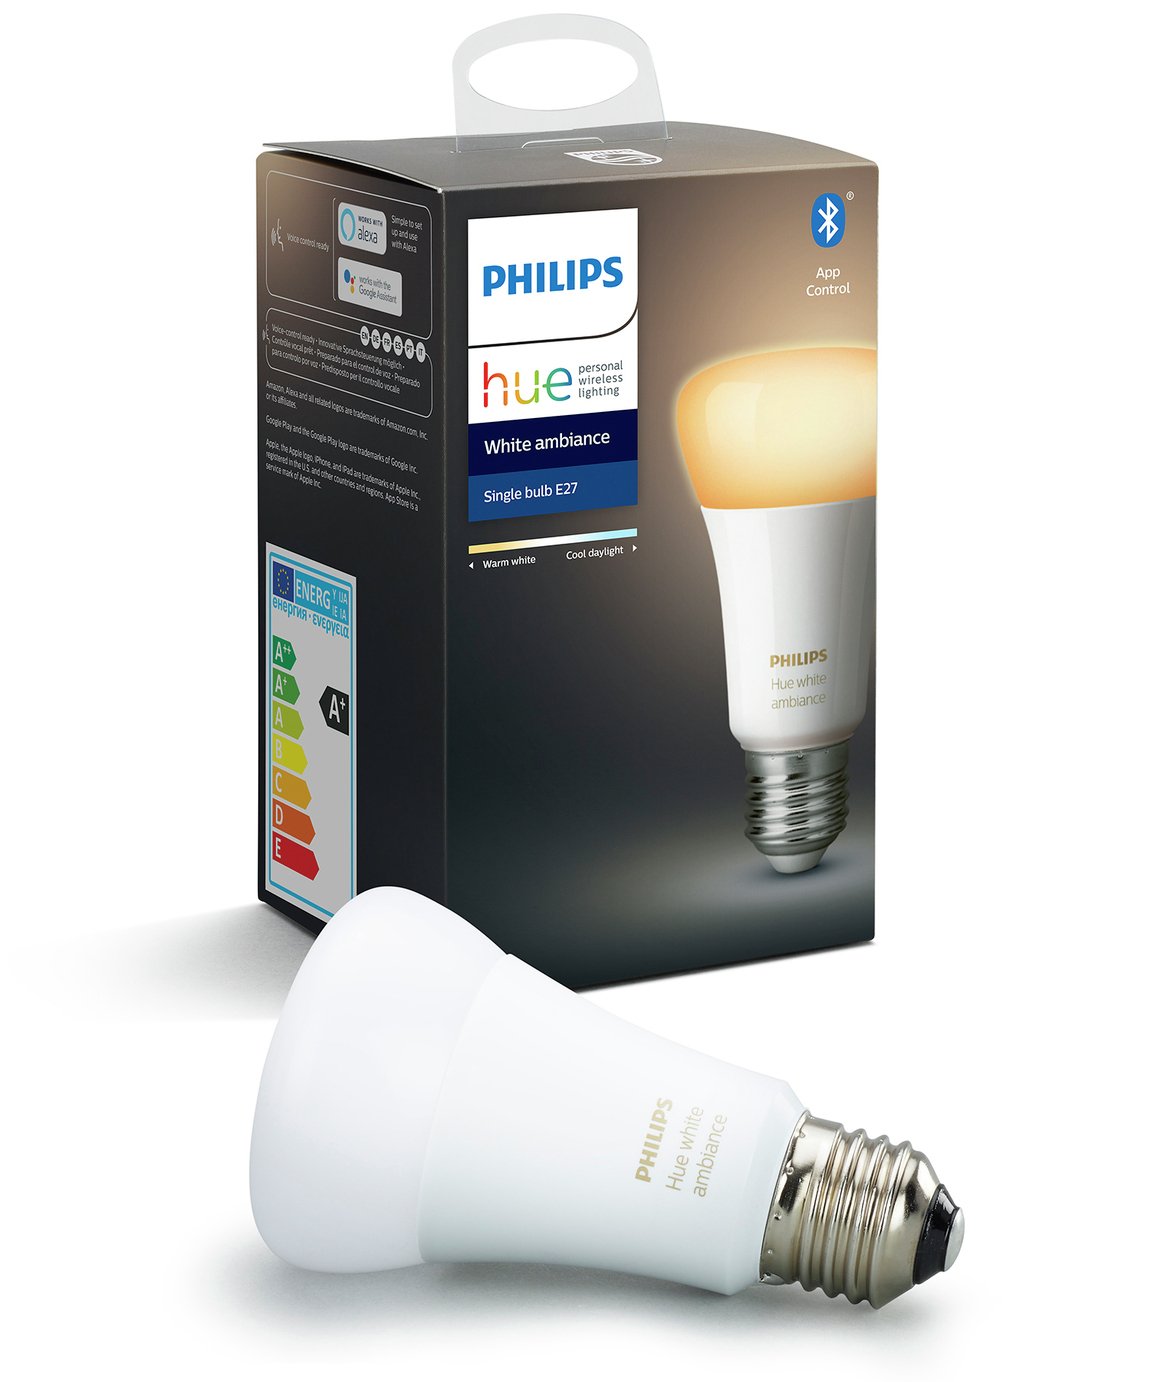 Philips Hue E27 White Ambiance Smart Bulb with Bluetooth Review